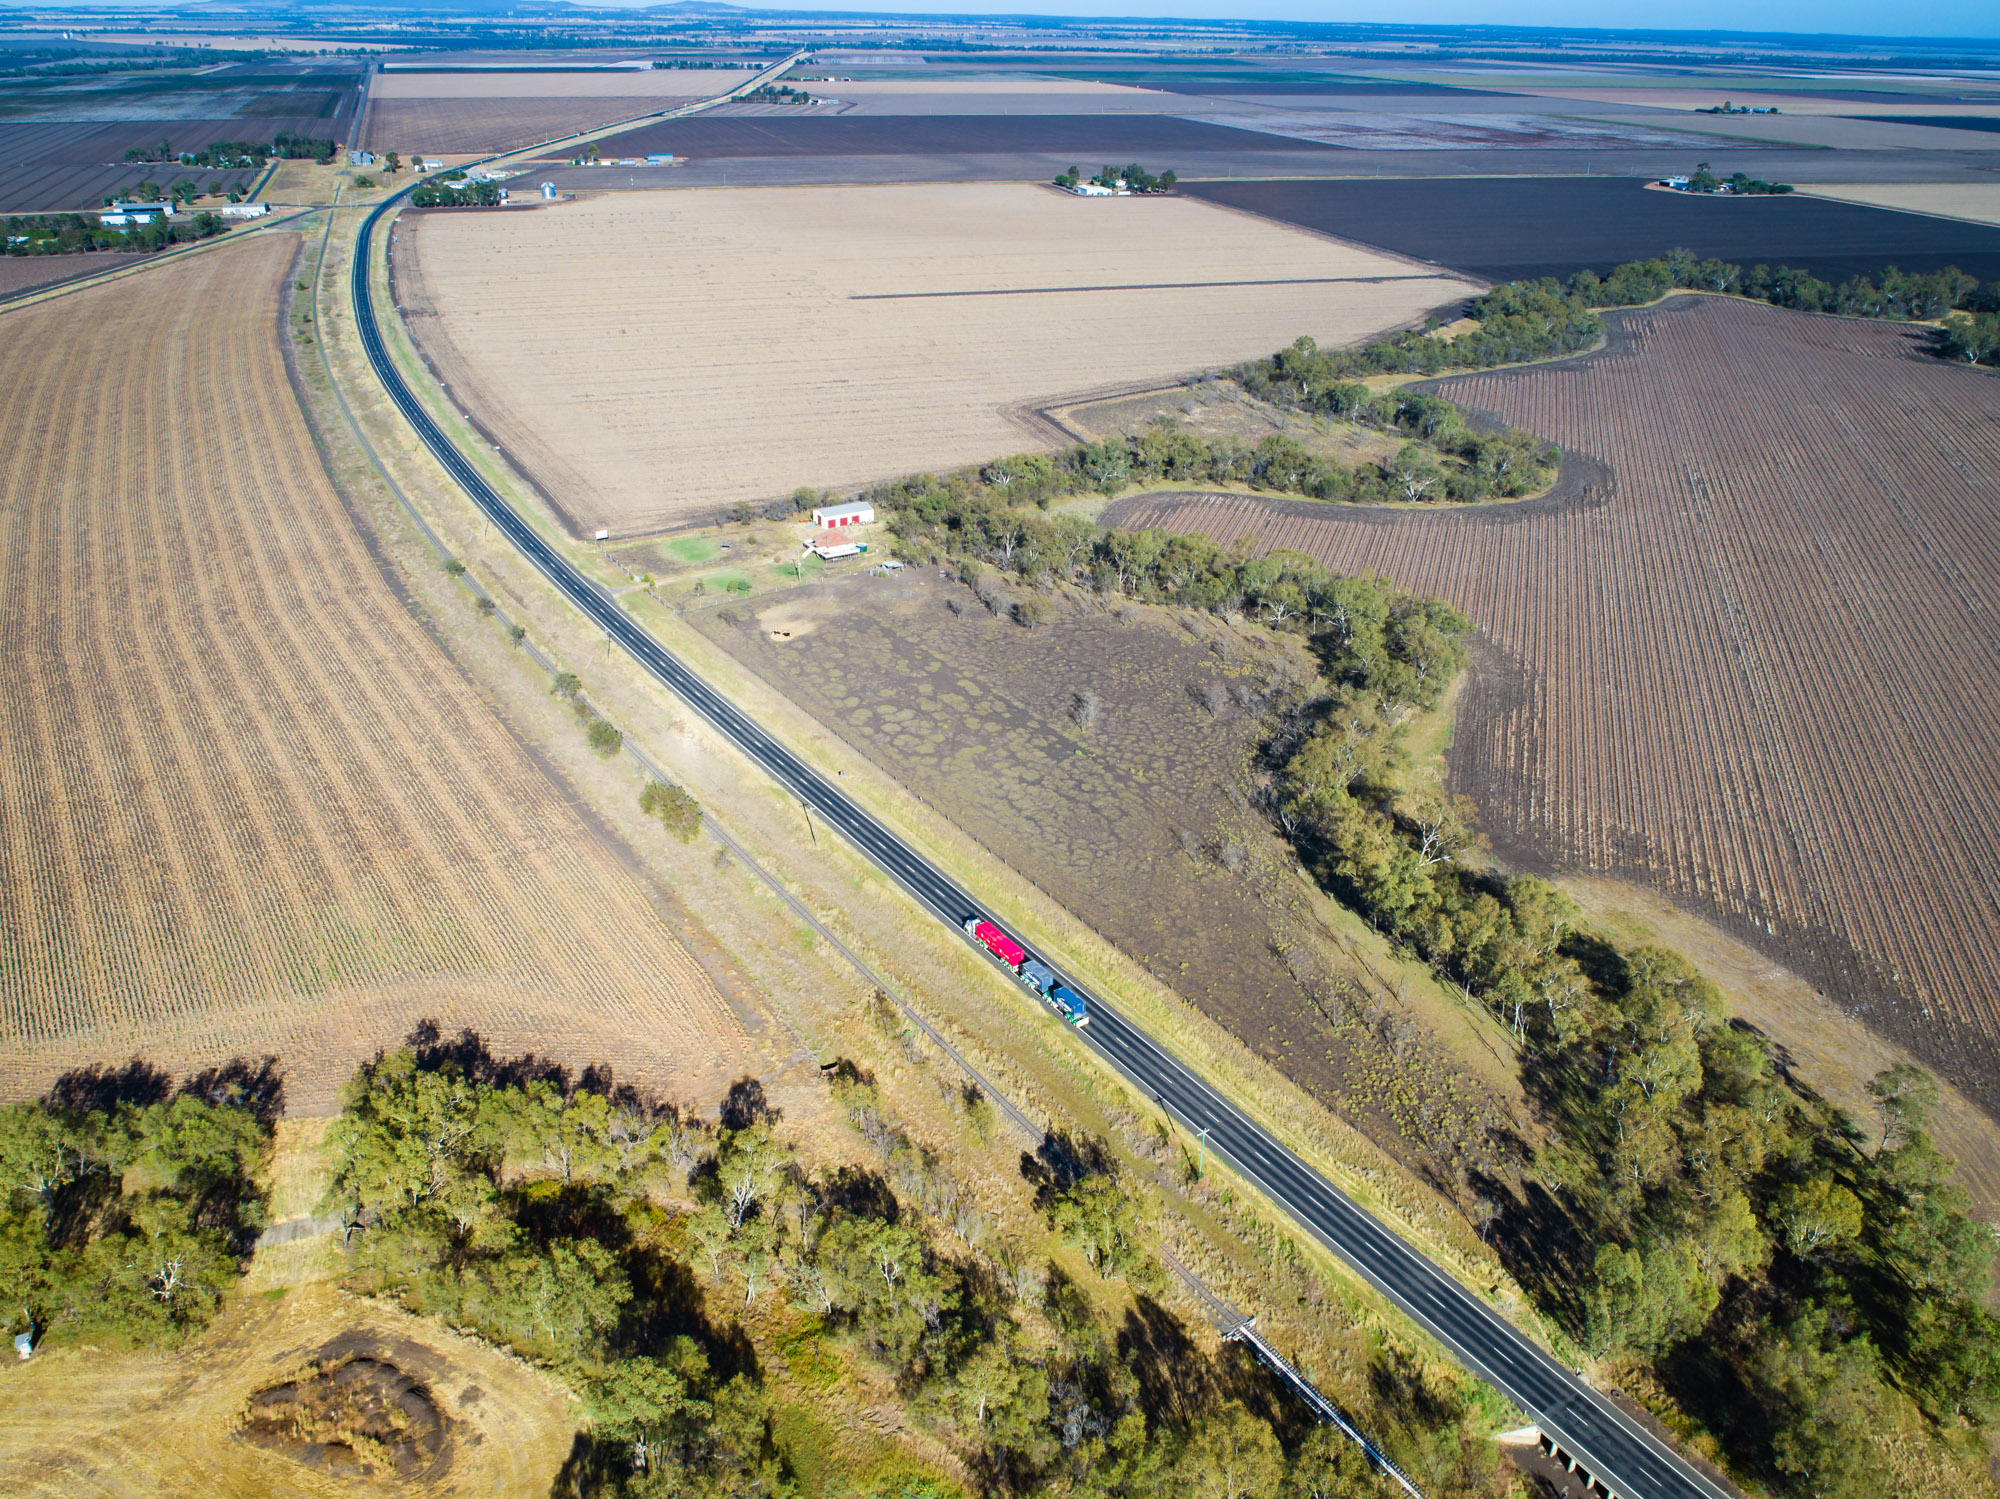 Condamine floodplain in the Border to Gowrie project